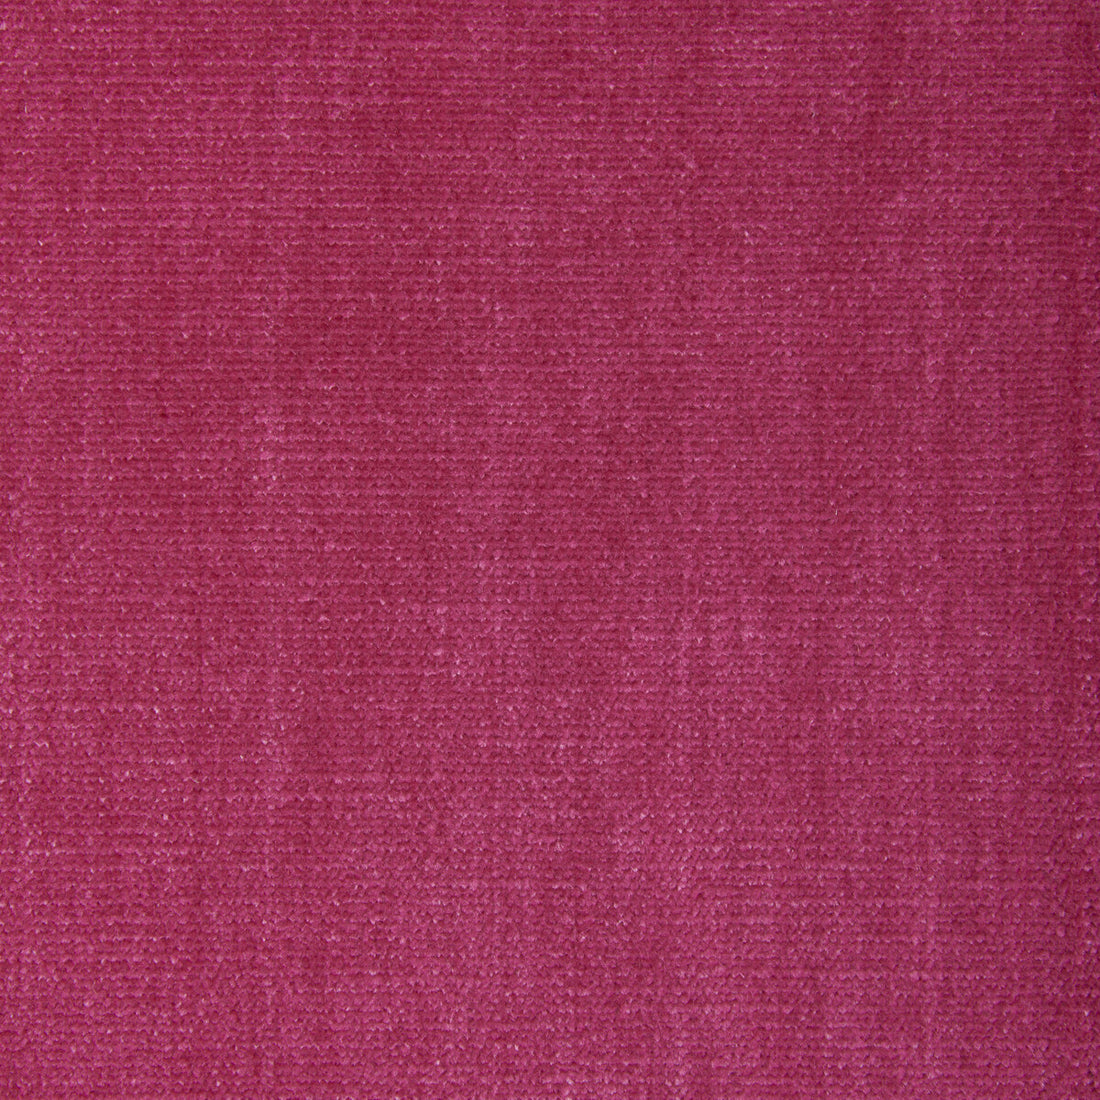 Kravet Smart fabric in 36076-77 color - pattern 36076.77.0 - by Kravet Smart in the Sumptuous Chenille II collection